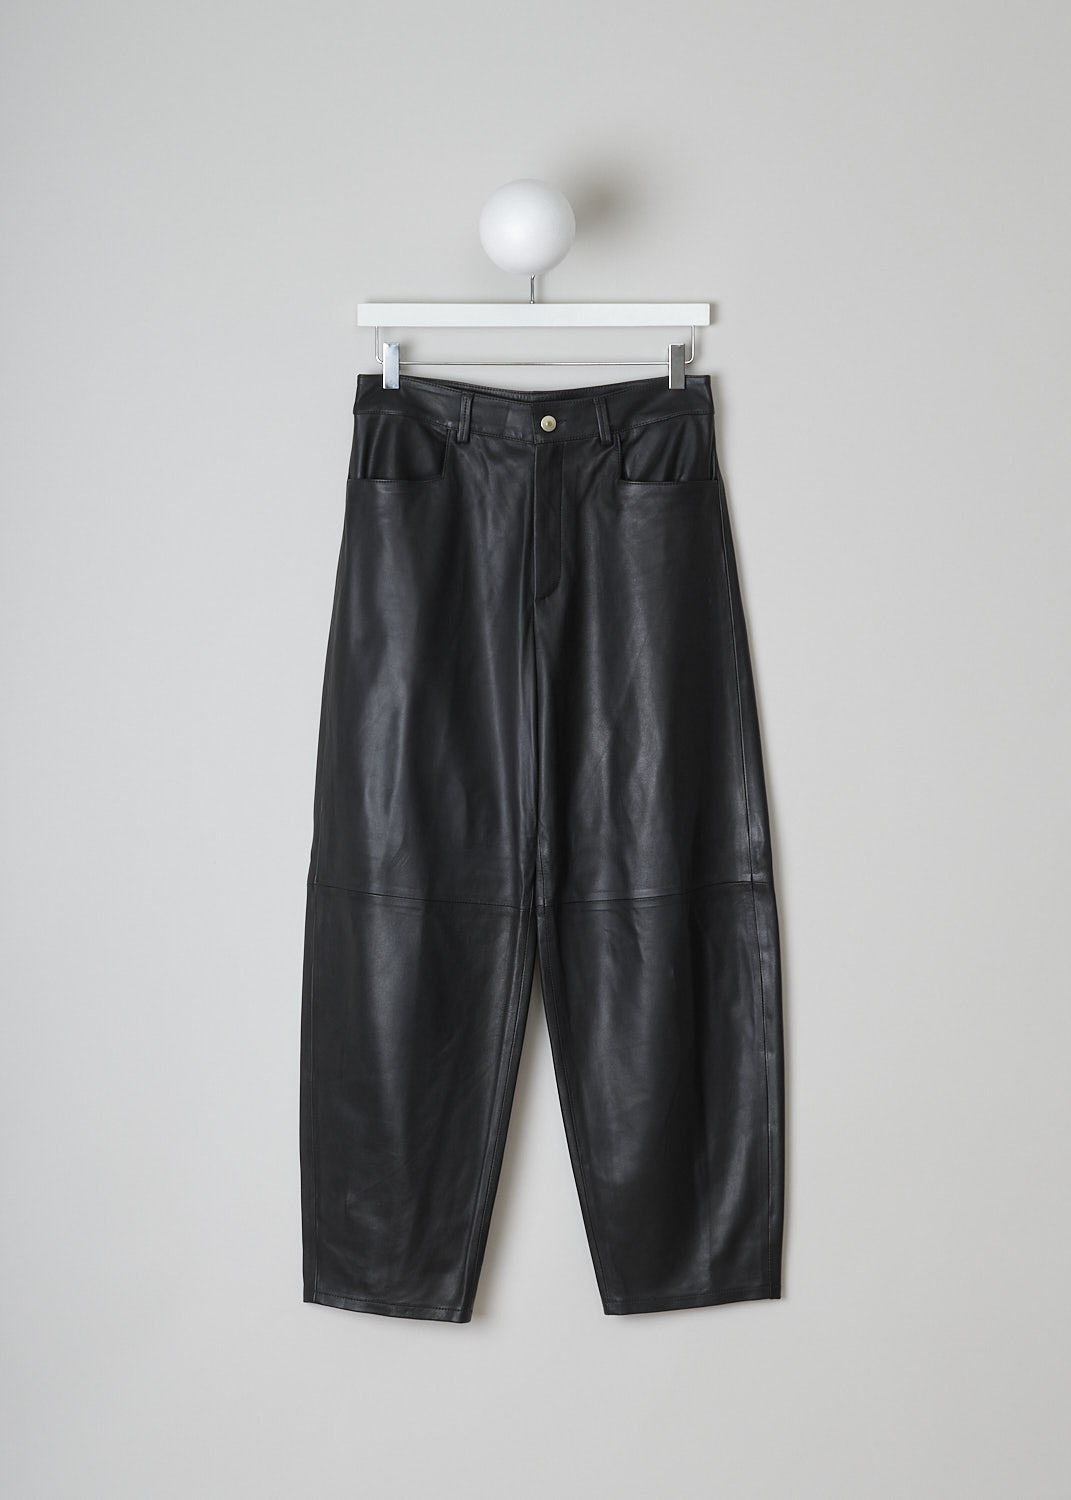 WANDLER, CHAMOMILE BLACK PANTS, 22306_060301_3200_CHAMOMILE_BLACK, Black, Front, These black leather Chamomile pants have a waistband with belt loops and a button and zip closure. The pants have a high-waisted fit. The balloon legs are cropped at the ankle. These pants have slanted pockets in the front and patch pockets in the back. 

